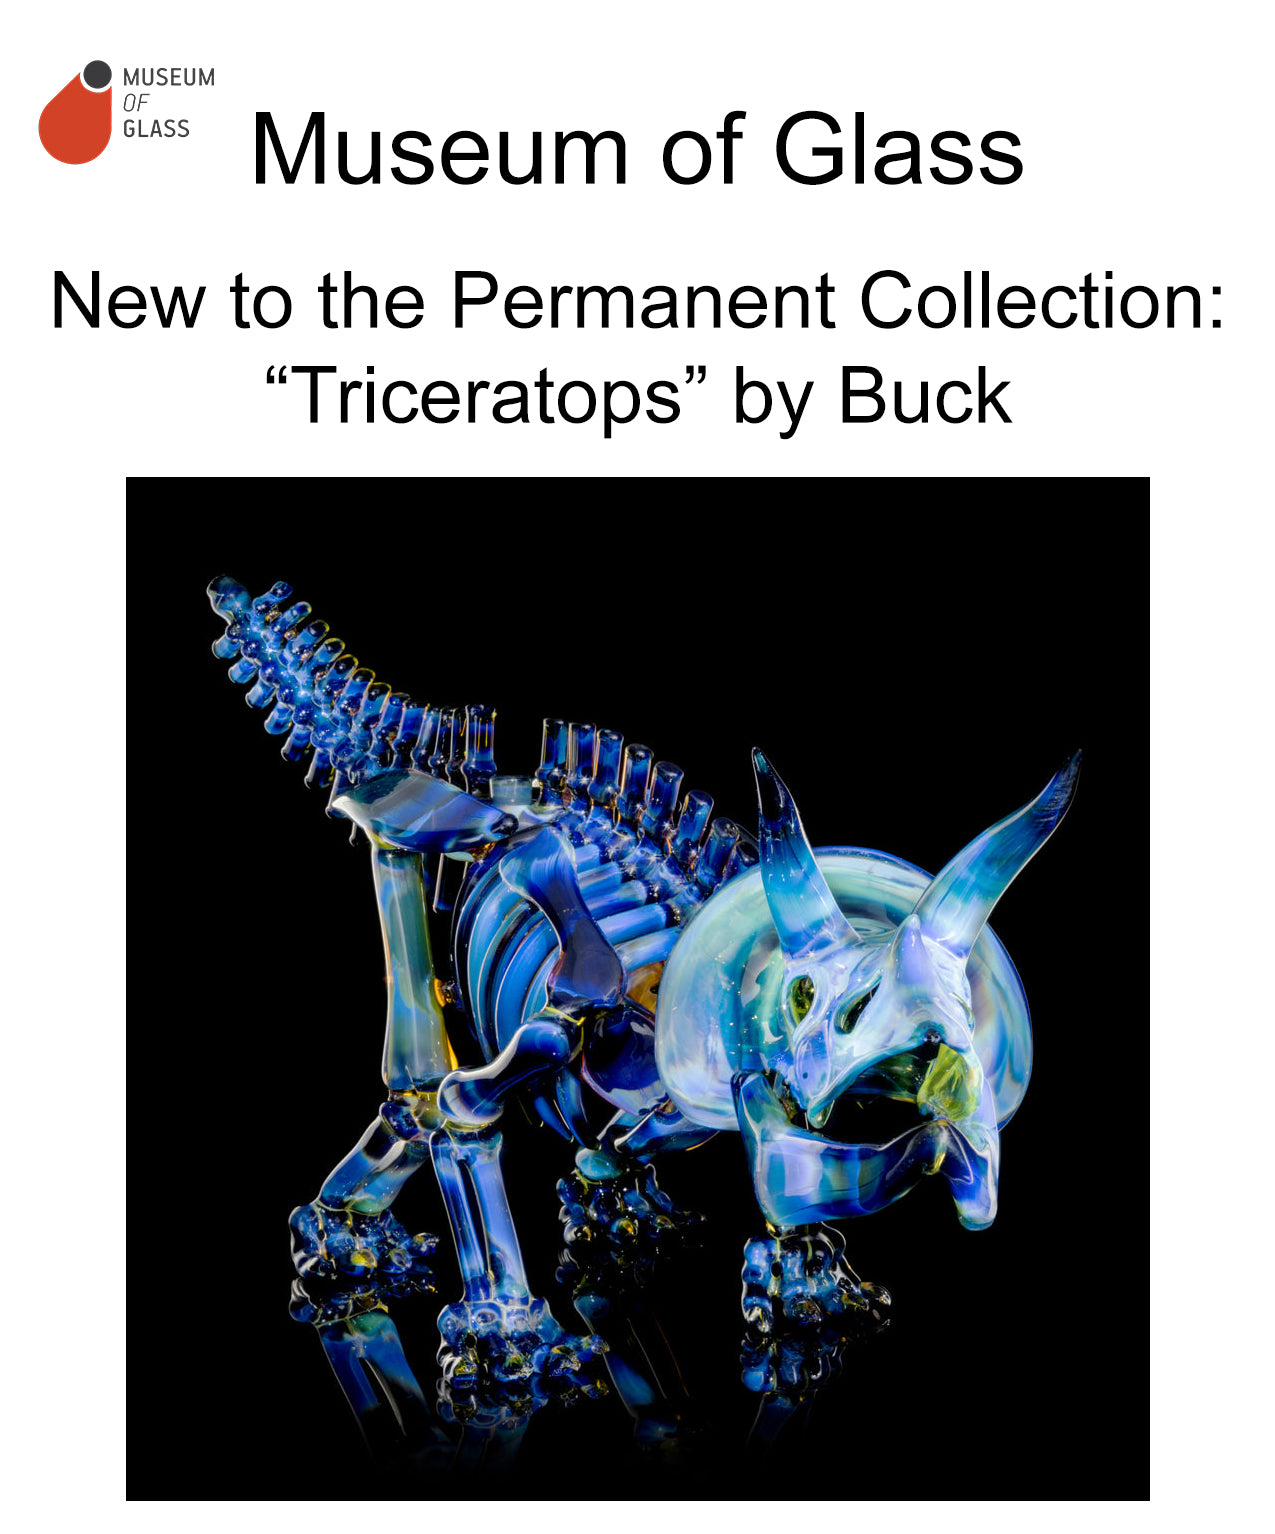 BUCK GLASS - Museum of Glass Permanent Collection: Triceratops by Buck